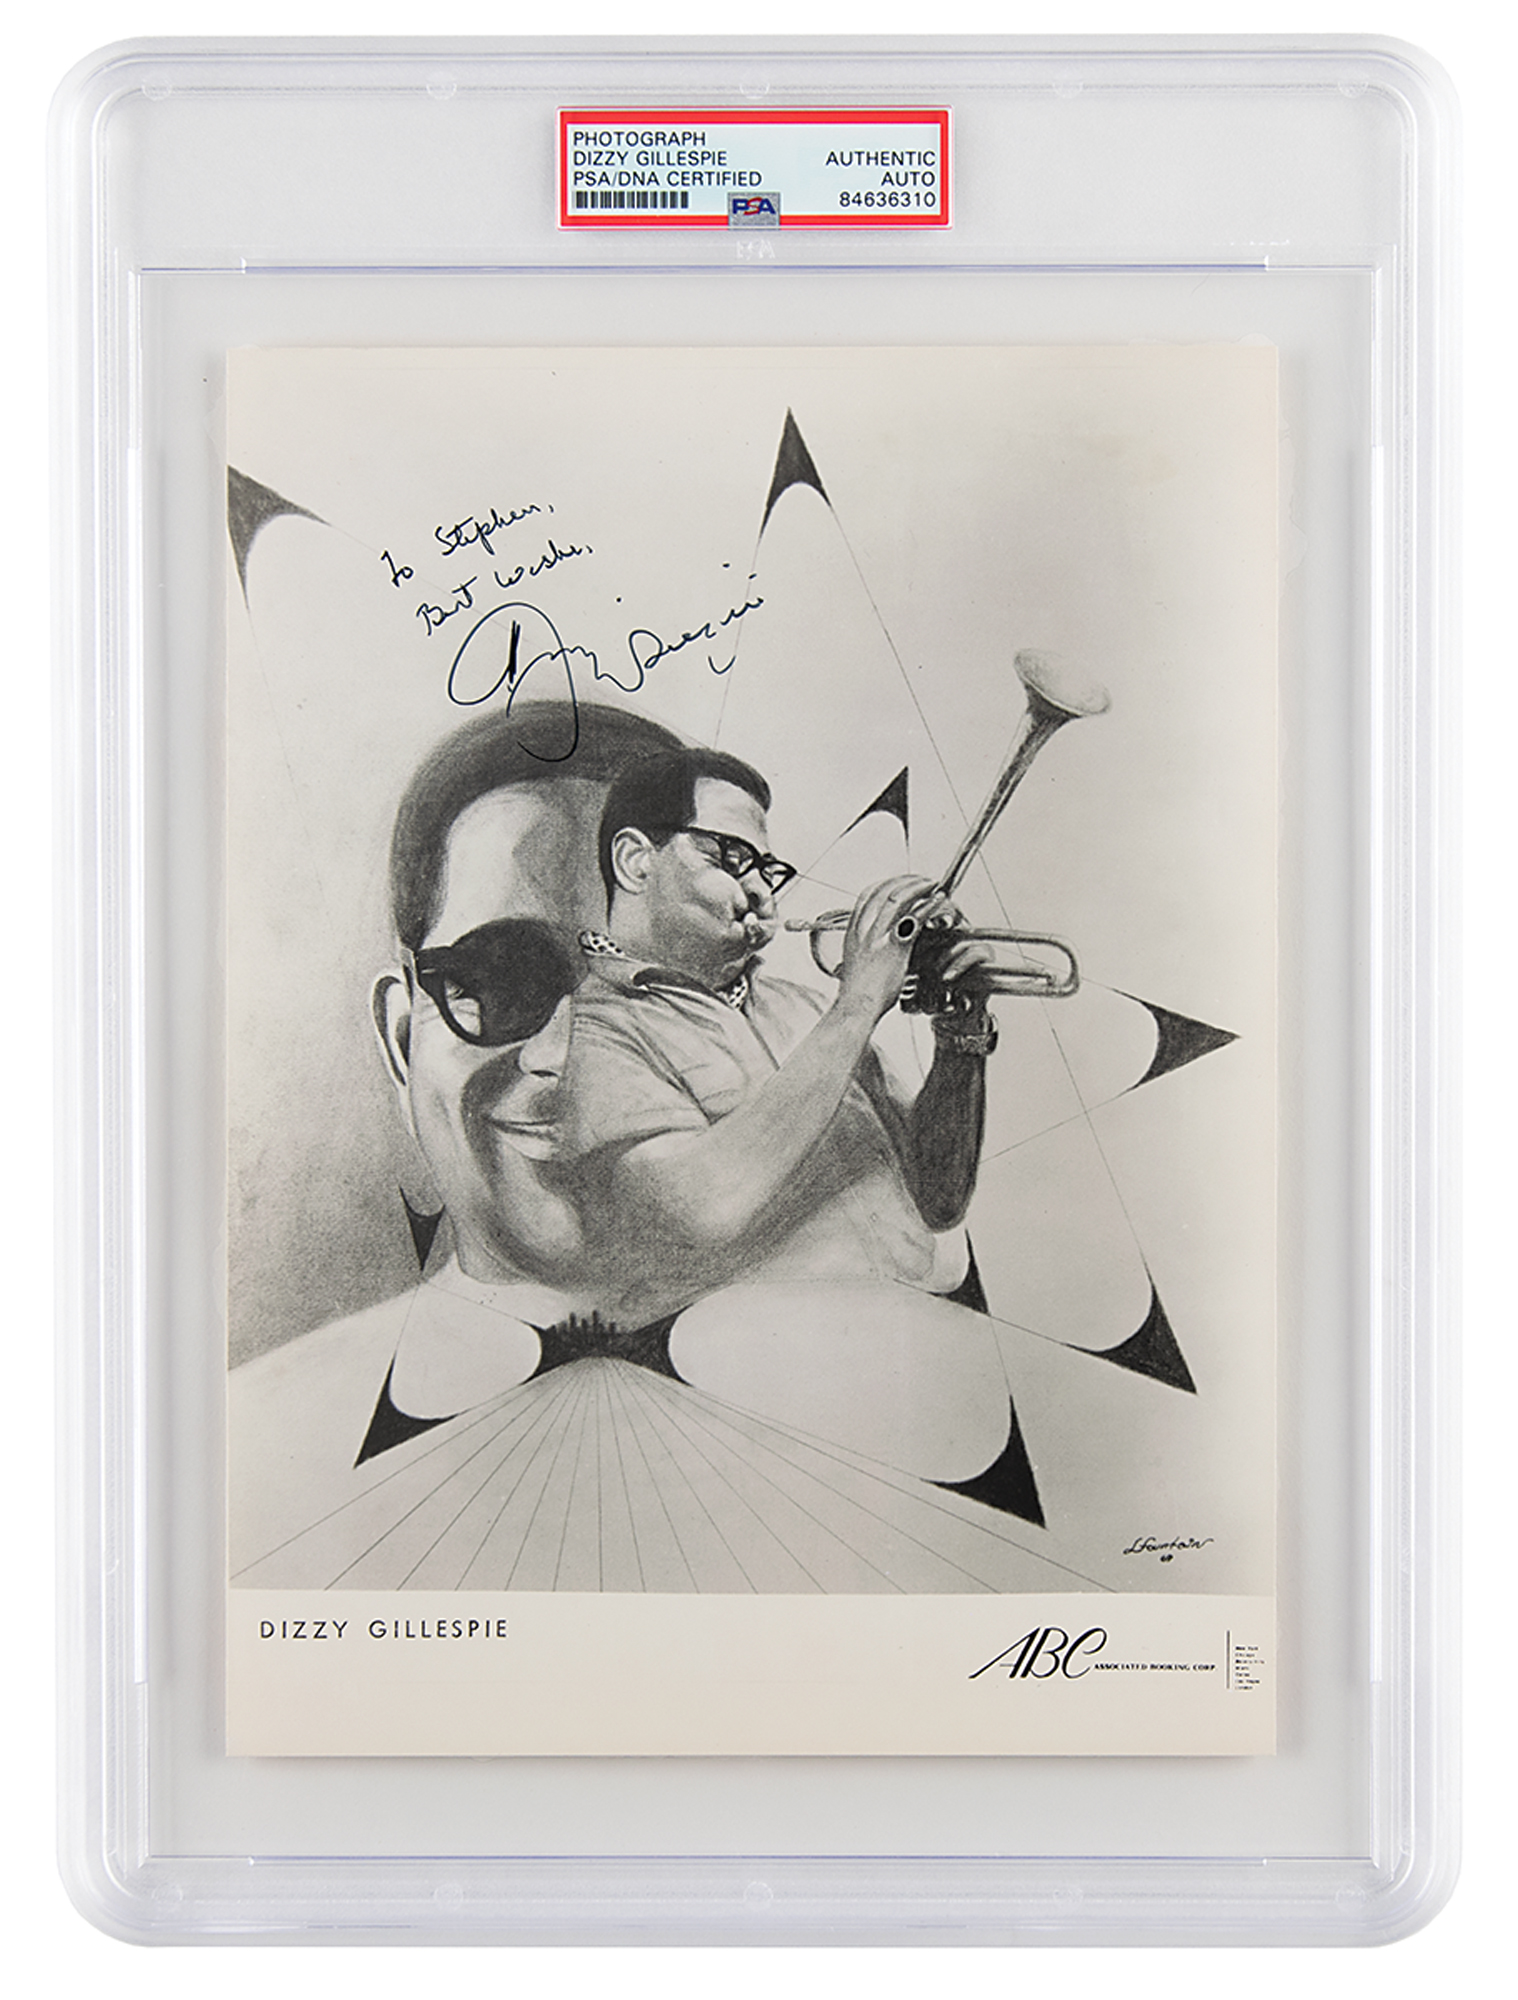 Lot #674 Dizzy Gillespie Signed Photograph